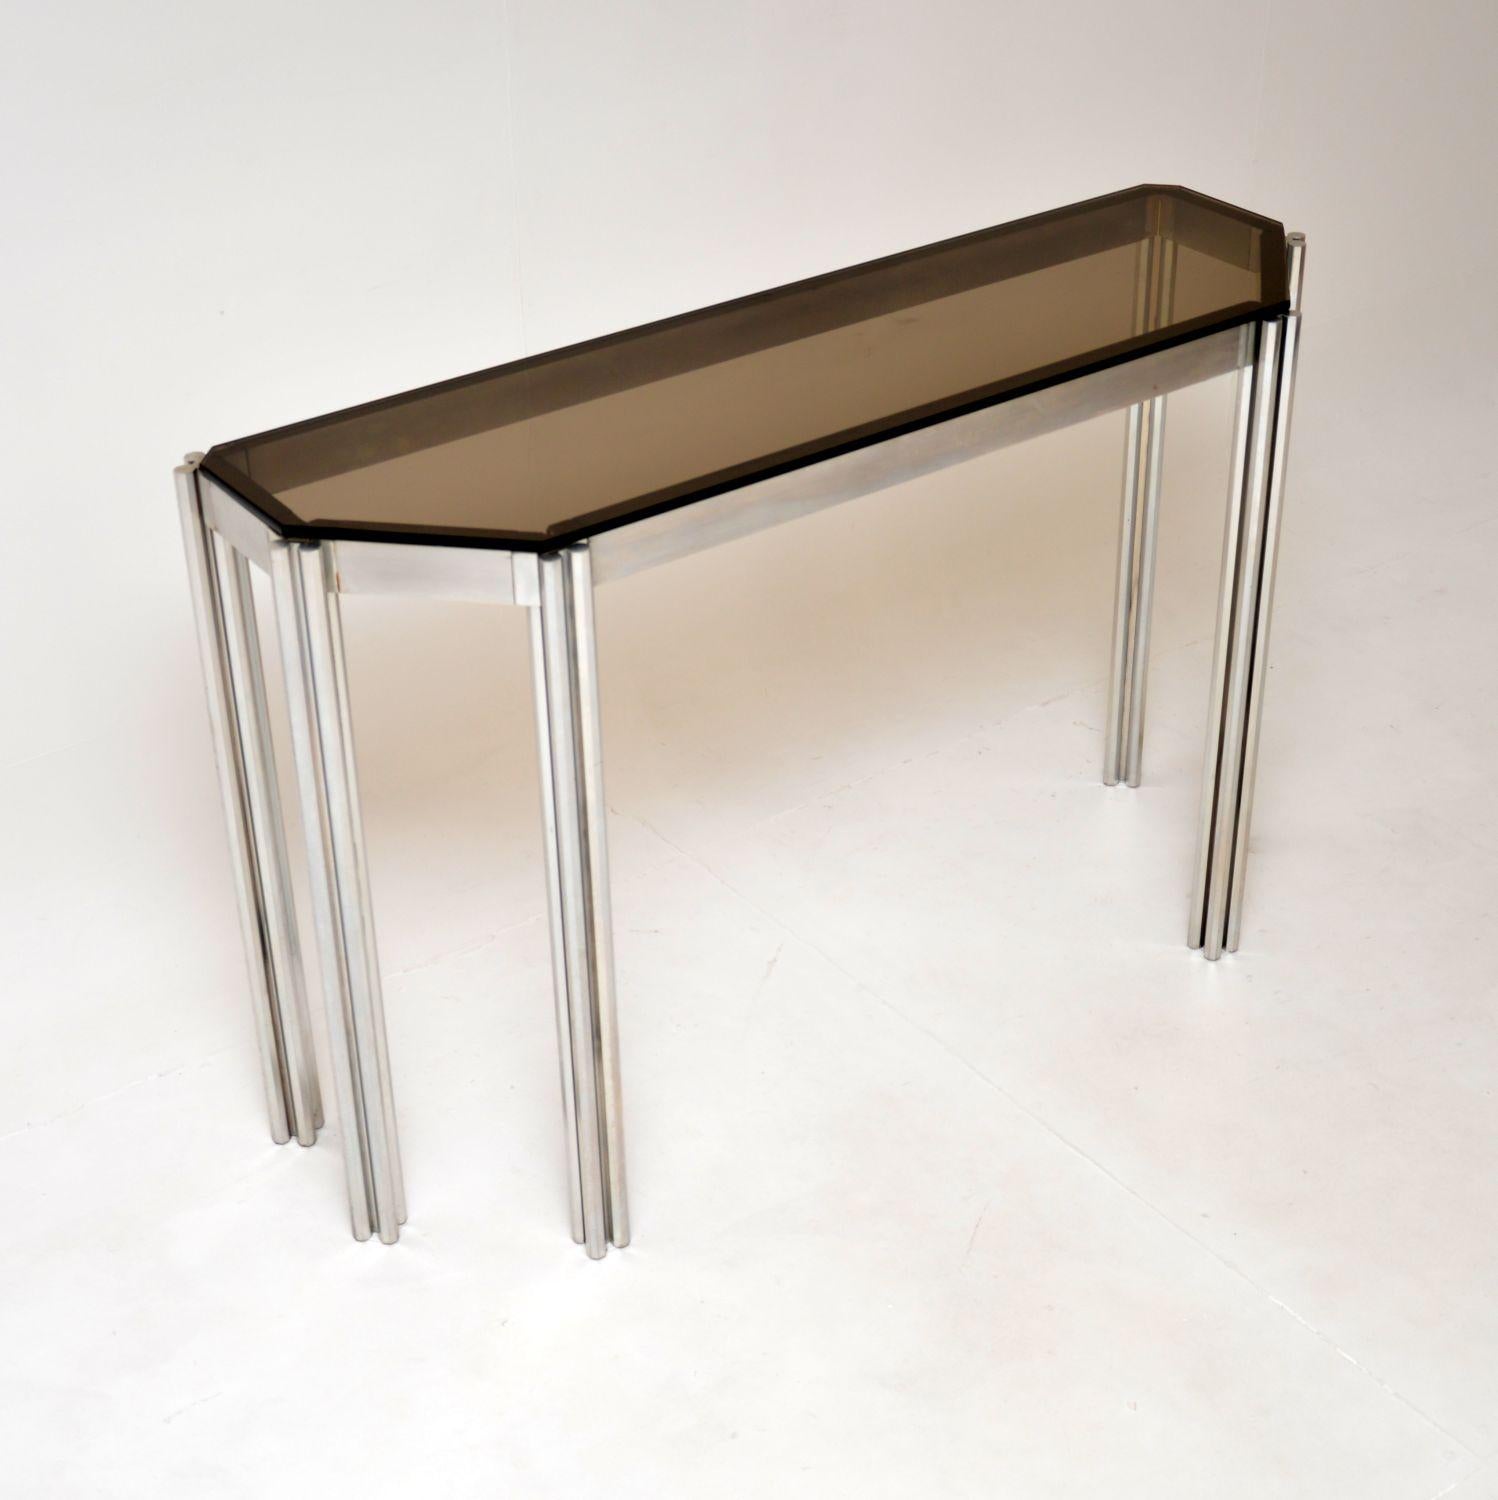 A stunning designer vintage Italian console table by Alessandro Albrizzi. This was made in Italy, it dates from the 1970’s.

The quality is outstanding, this has a very thick and well made brushed steel frame, with an extra thick glass top.

The